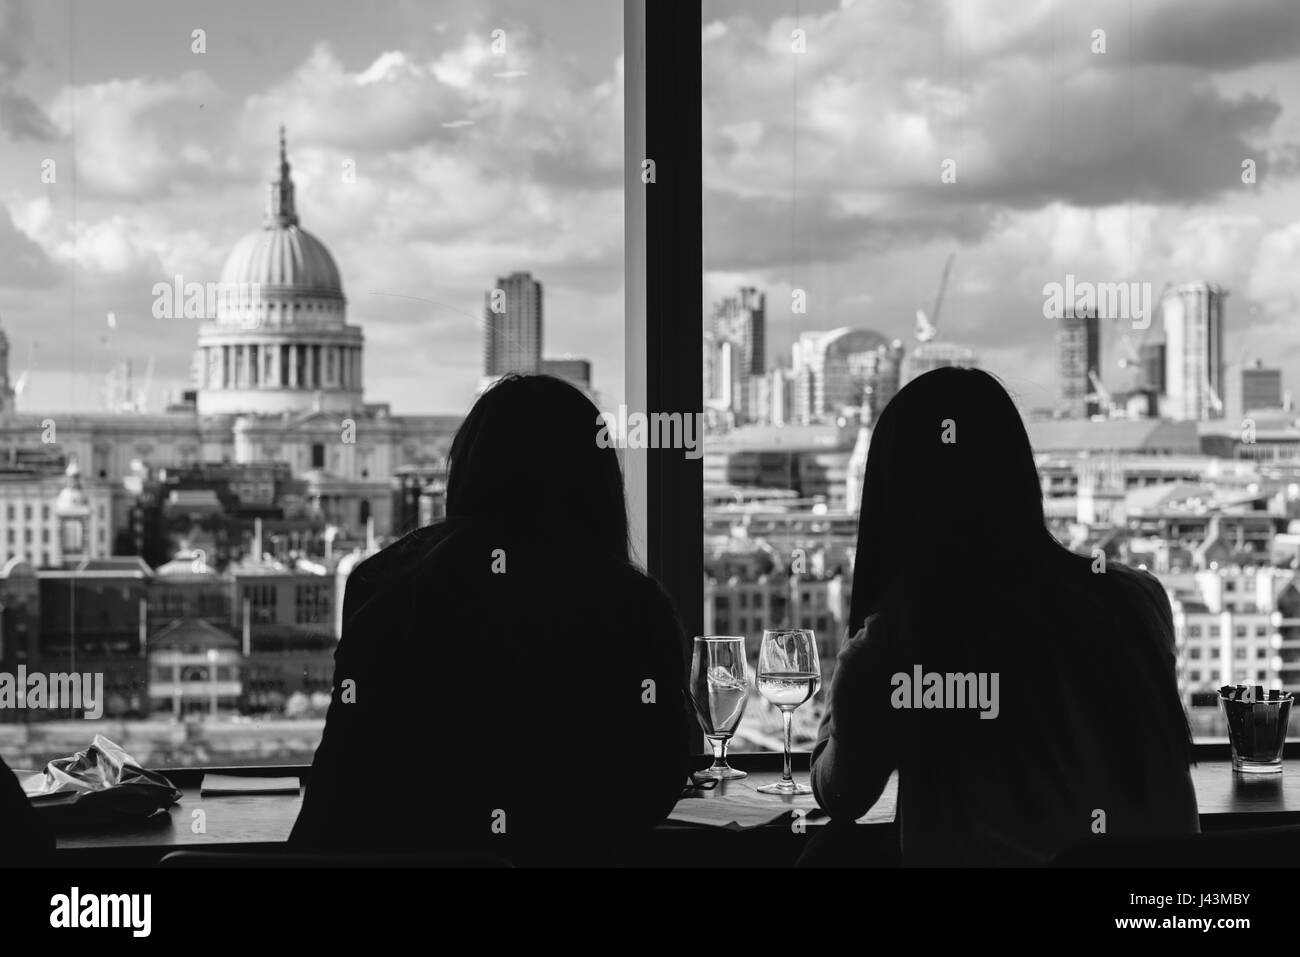 Silhouette of two people enjoying a wine overlooking St. Paul's cathedral and London skyline Stock Photo